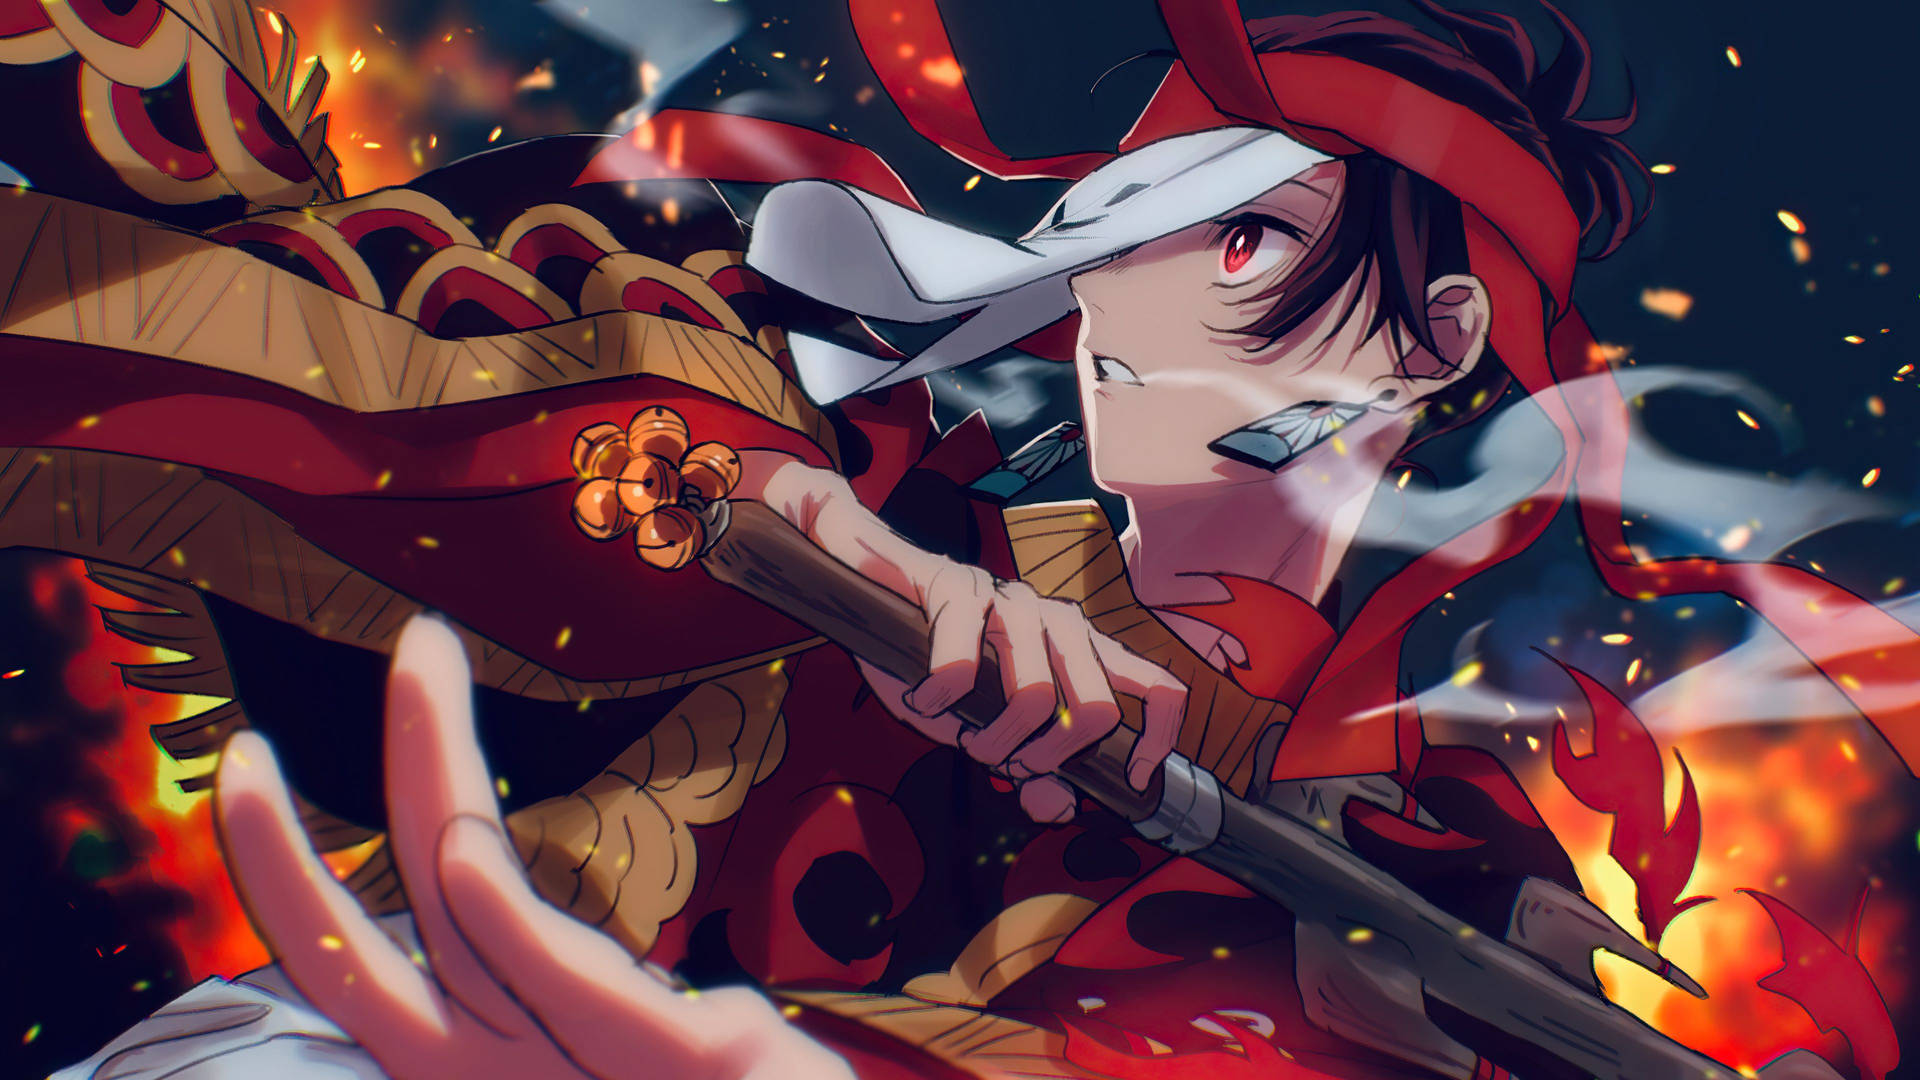 Fantastical 4K Anime Art designed with vivid colors and complex detail Wallpaper